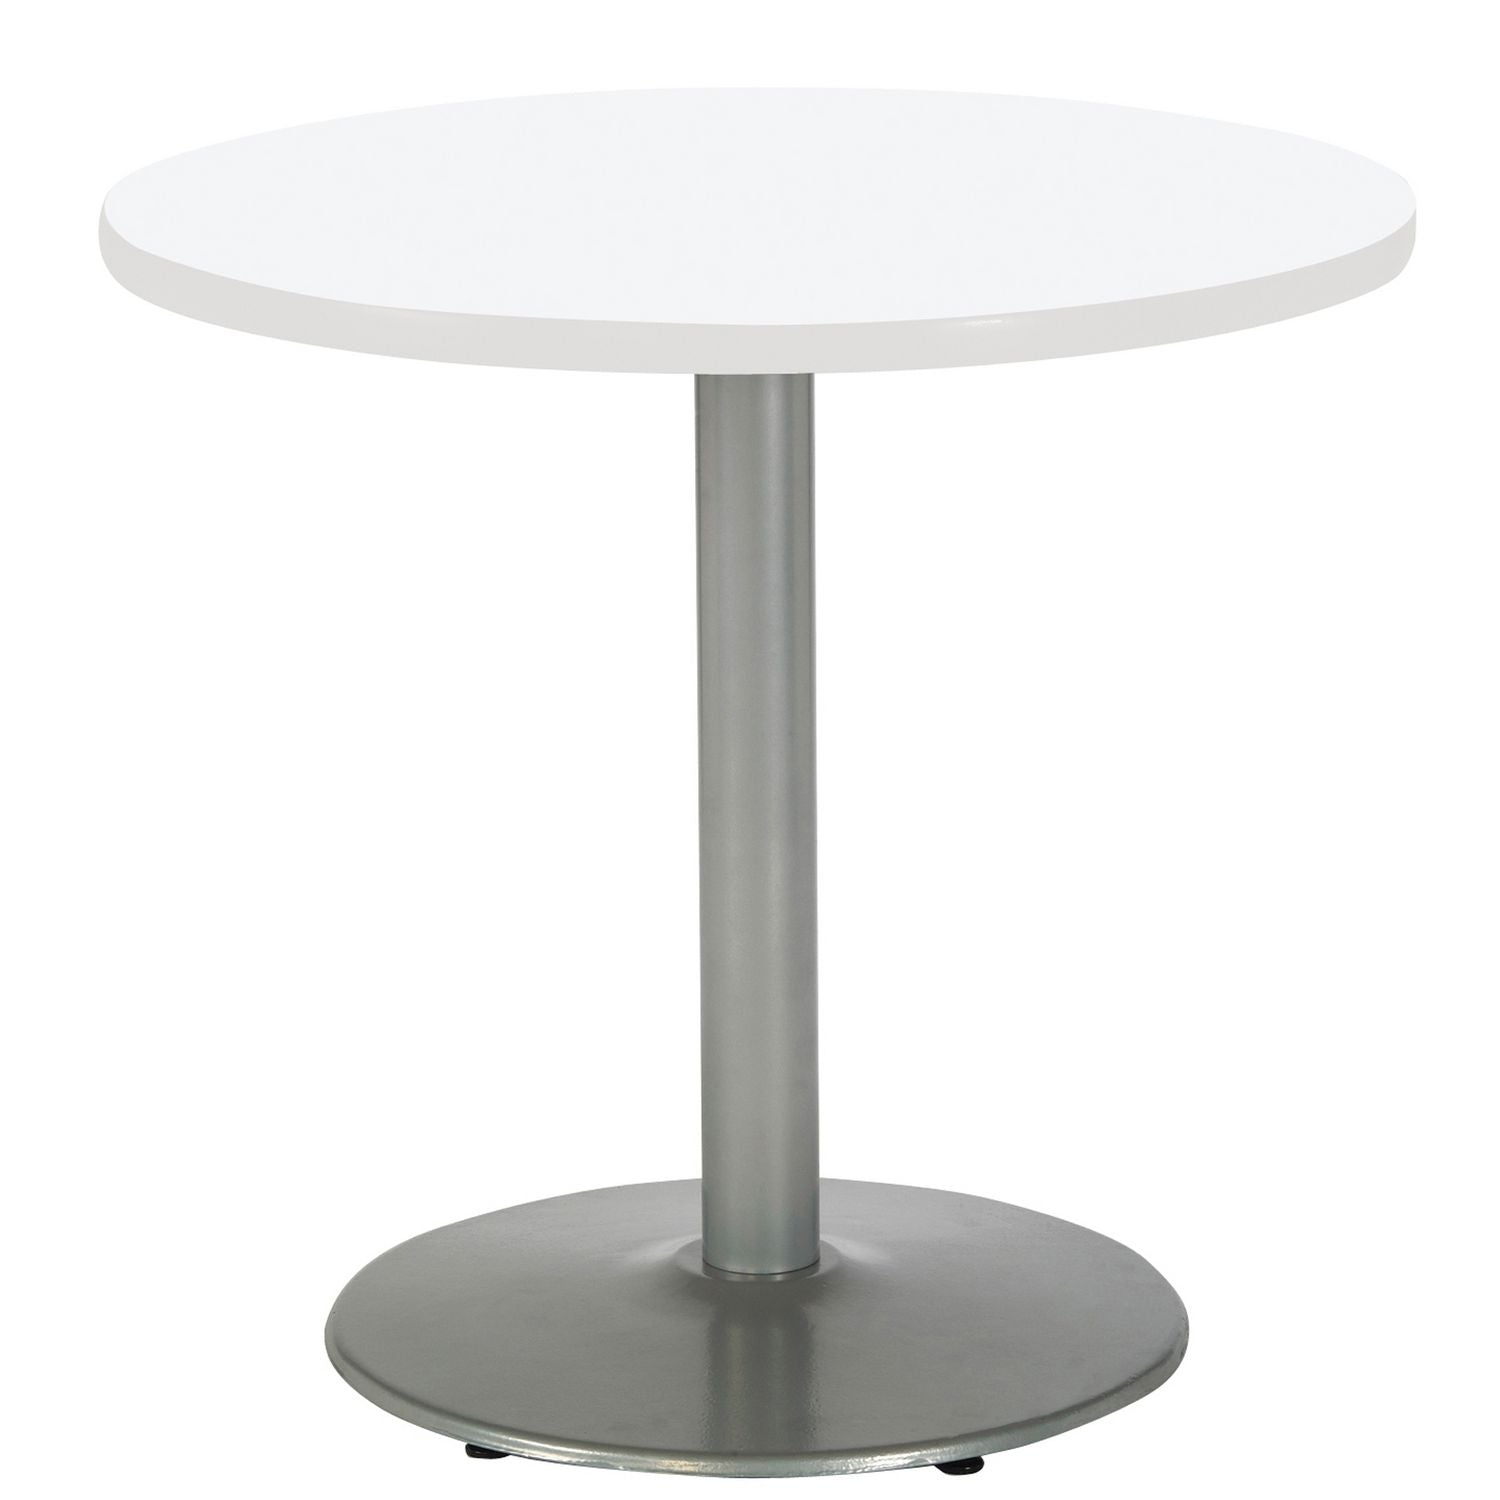 pedestal-table-with-four-periwinkle-kool-series-chairs-round-36-dia-x-29h-designer-white-ships-in-4-6-business-days_kfi811774036740 - 2